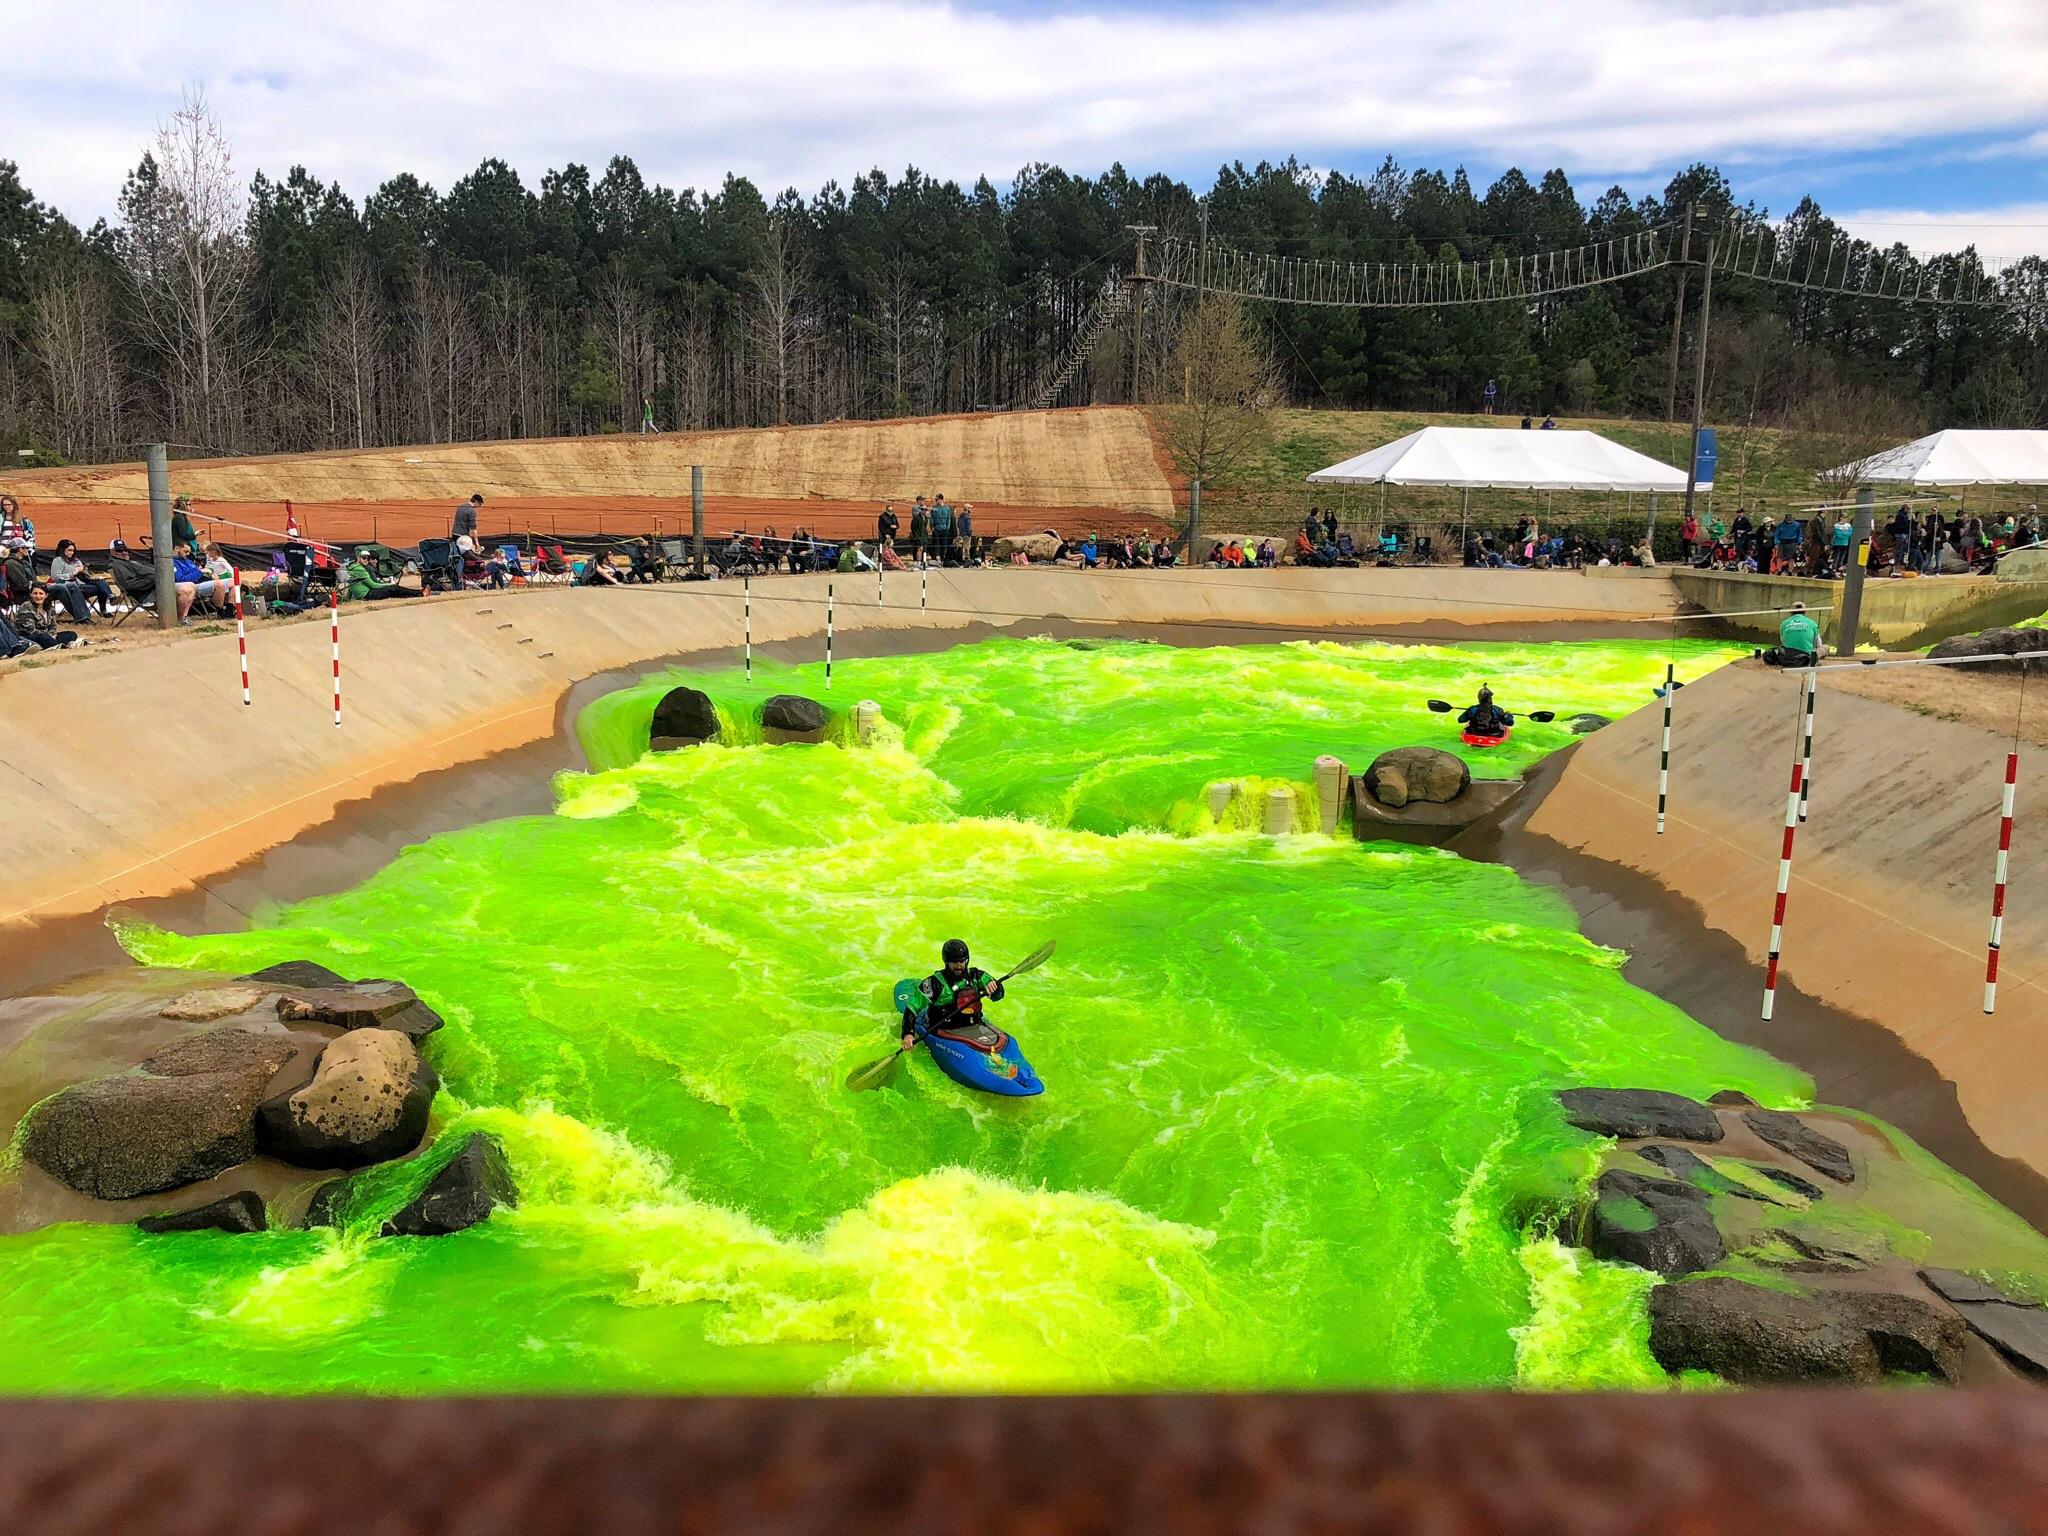 The U.S. National Whitewater Center turned the water green for Some reason.